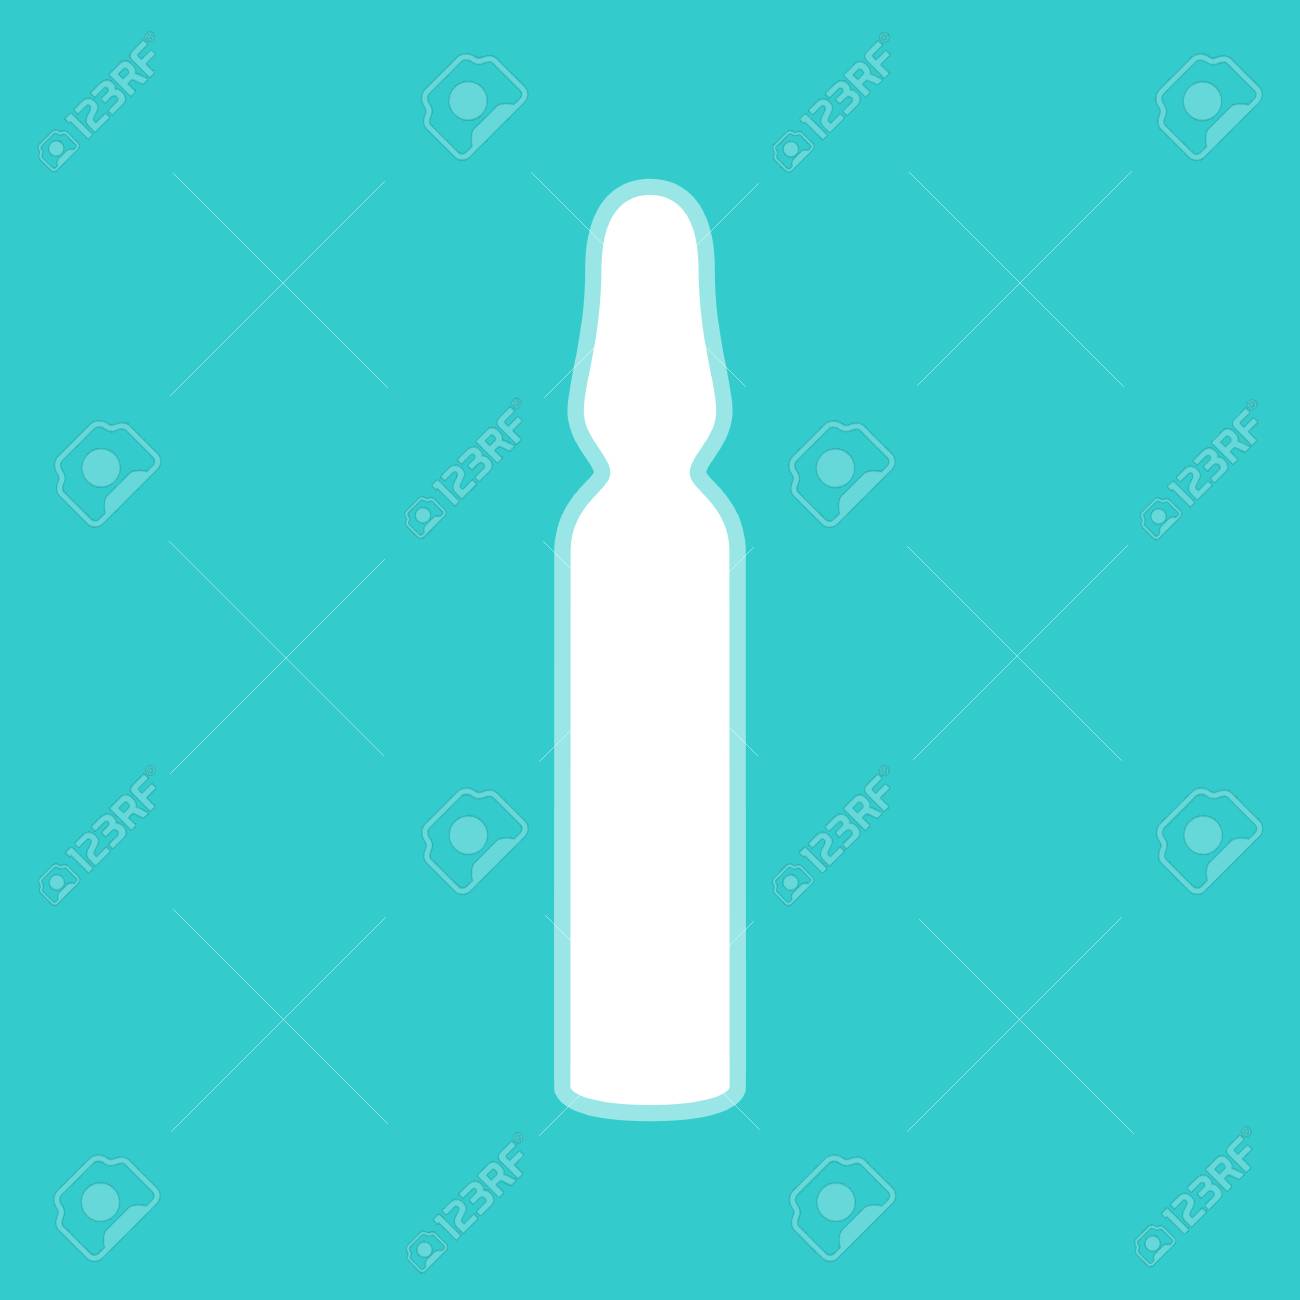 Medical Ampoule Sign White Icon With Whitish